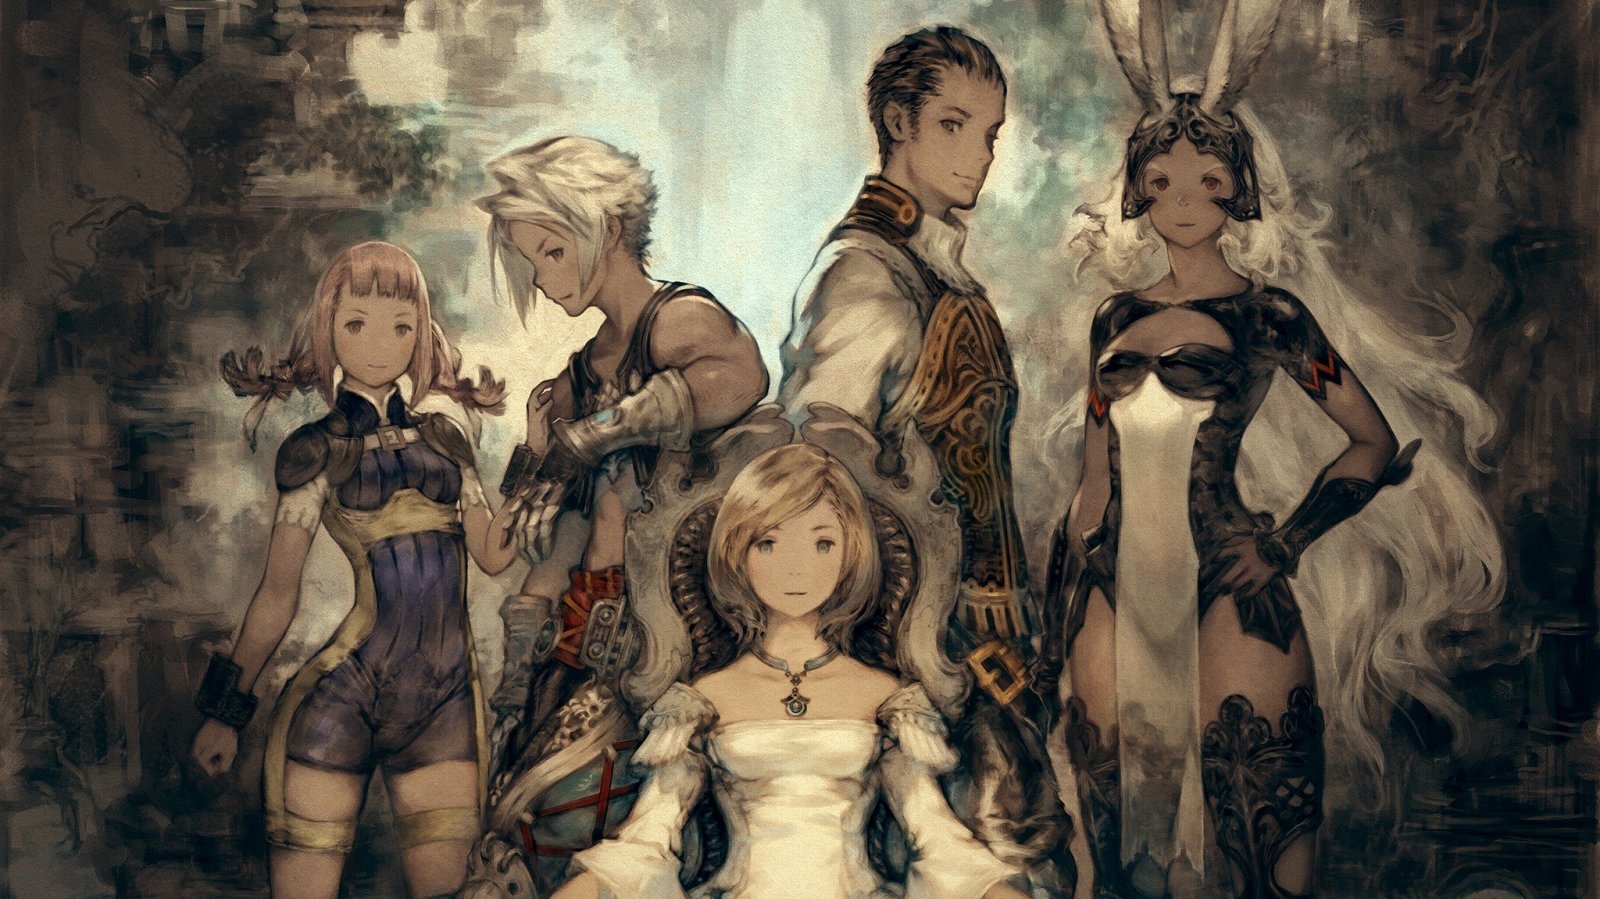 'Final Fantasy XII' arrives on Switch and Xbox One | DeviceDaily.com